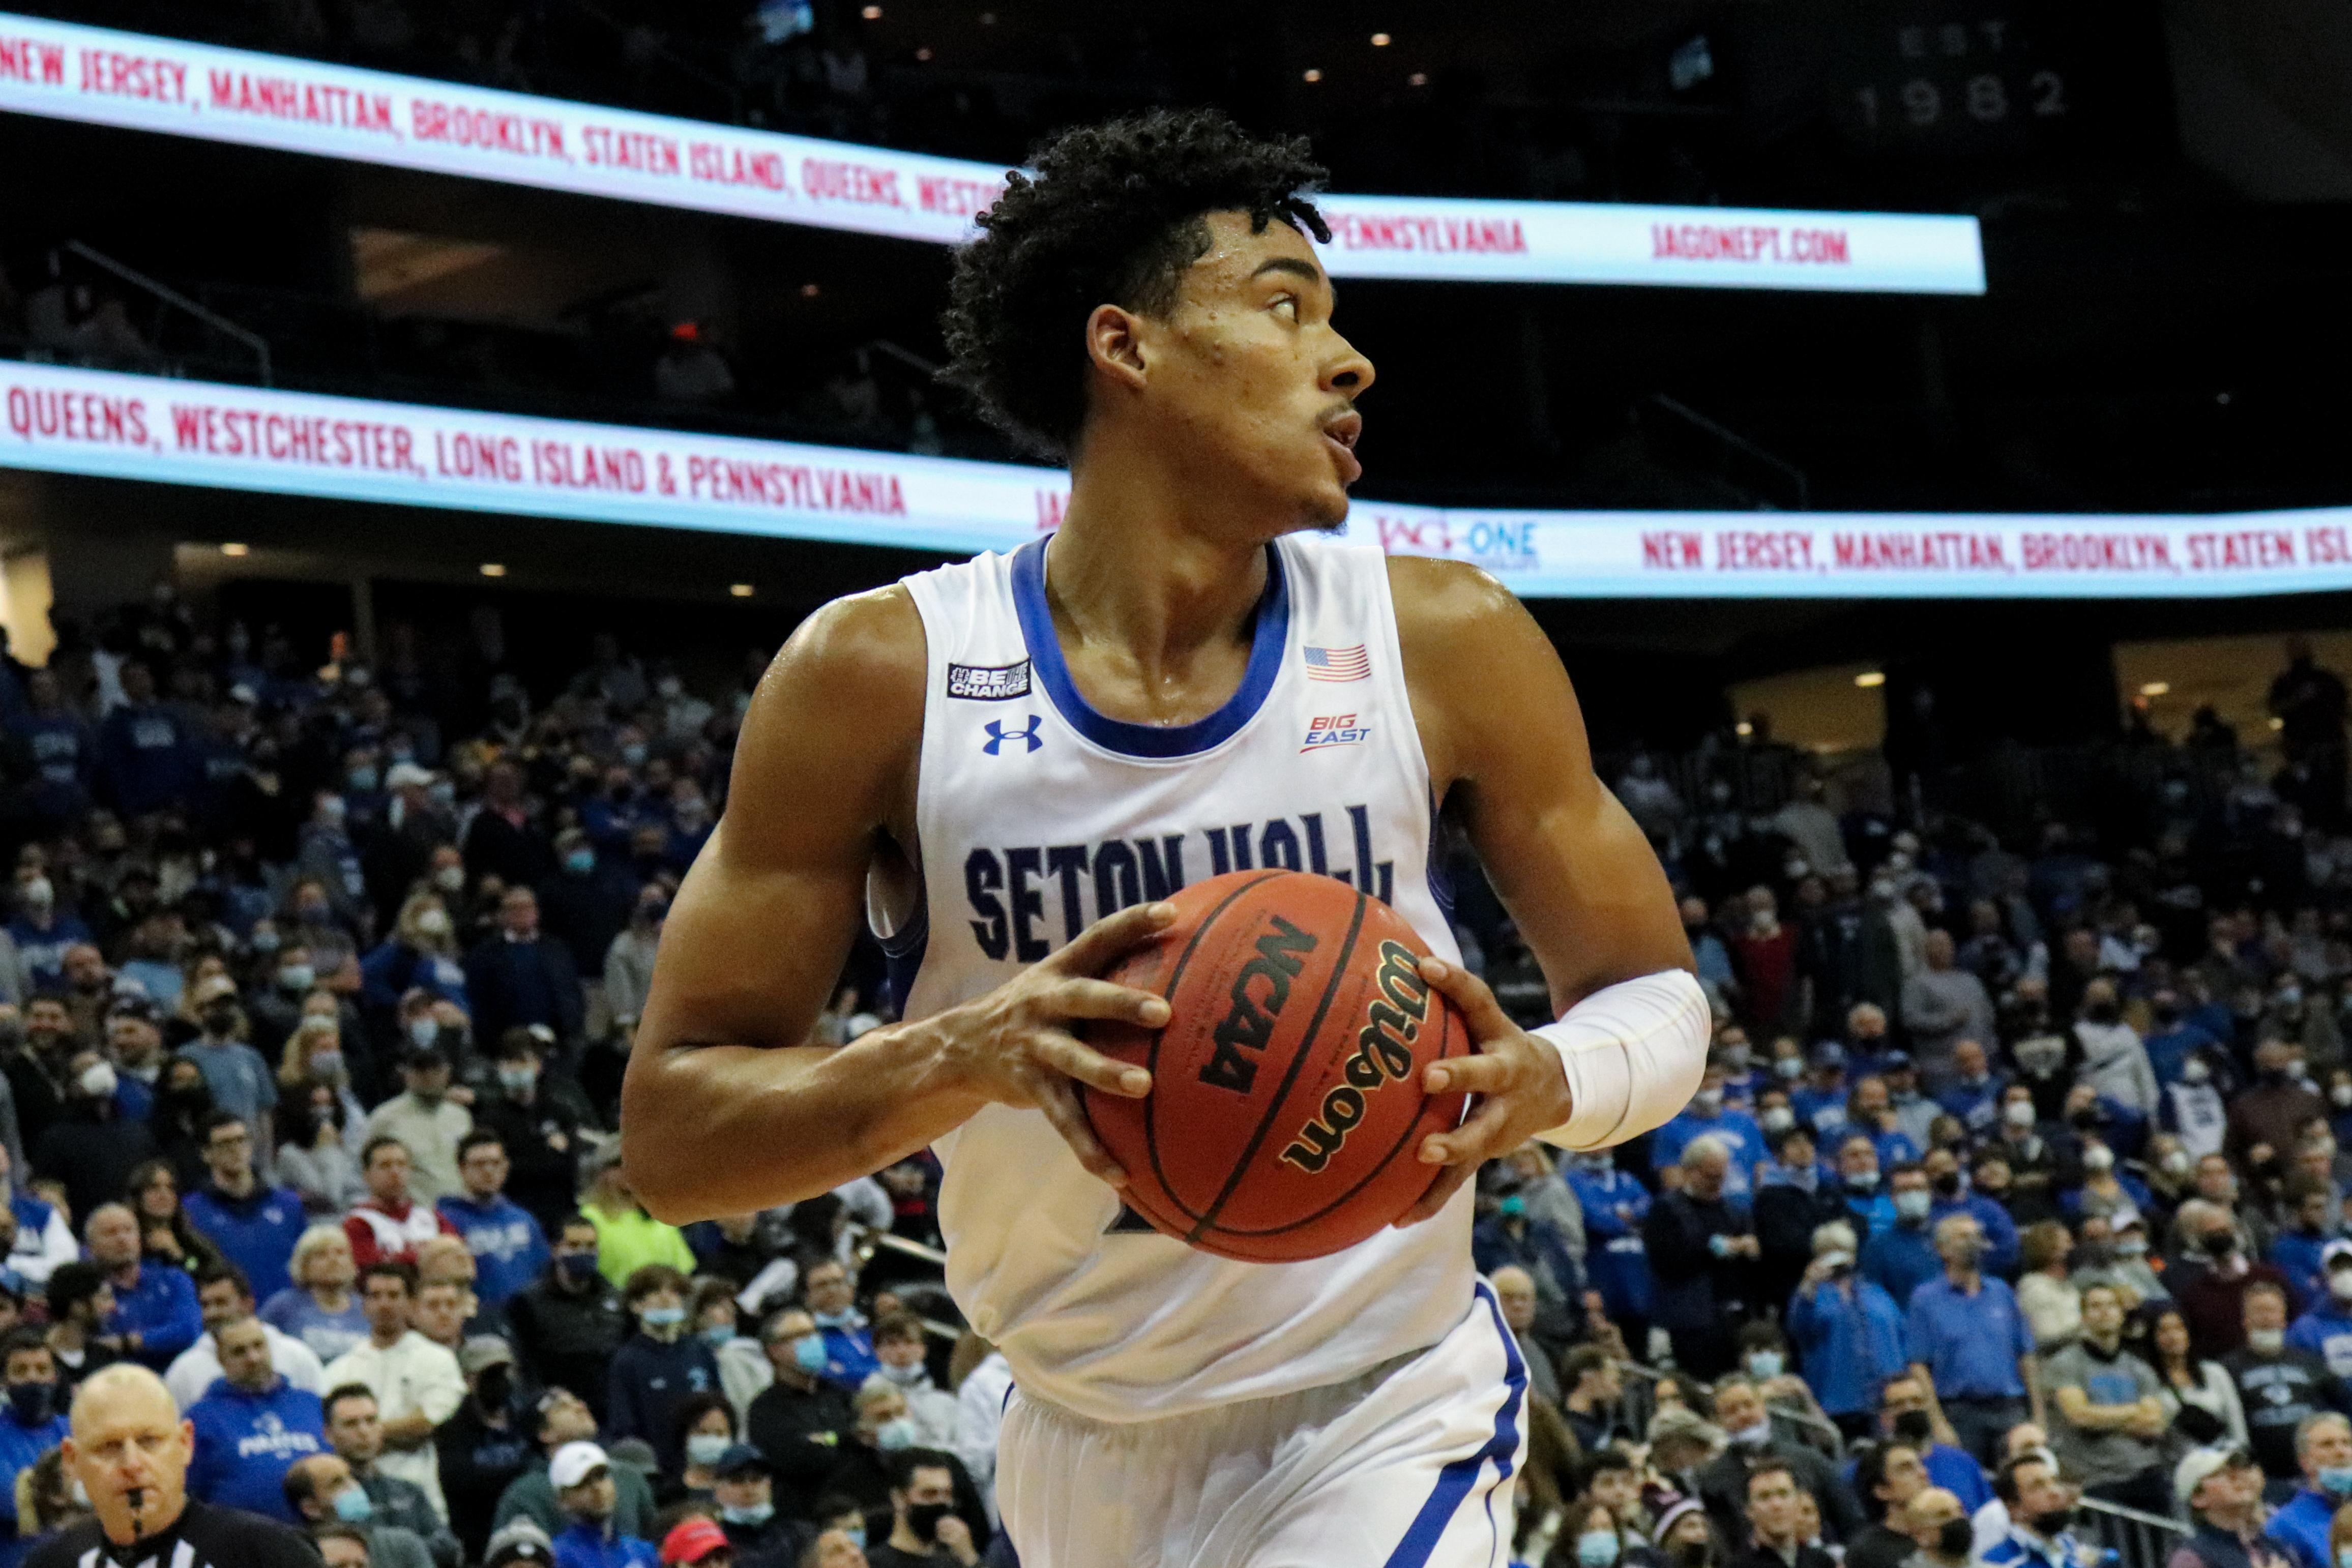 Seton Hall's Jared Rhoden holds the basketball during a home game vs. UConn.